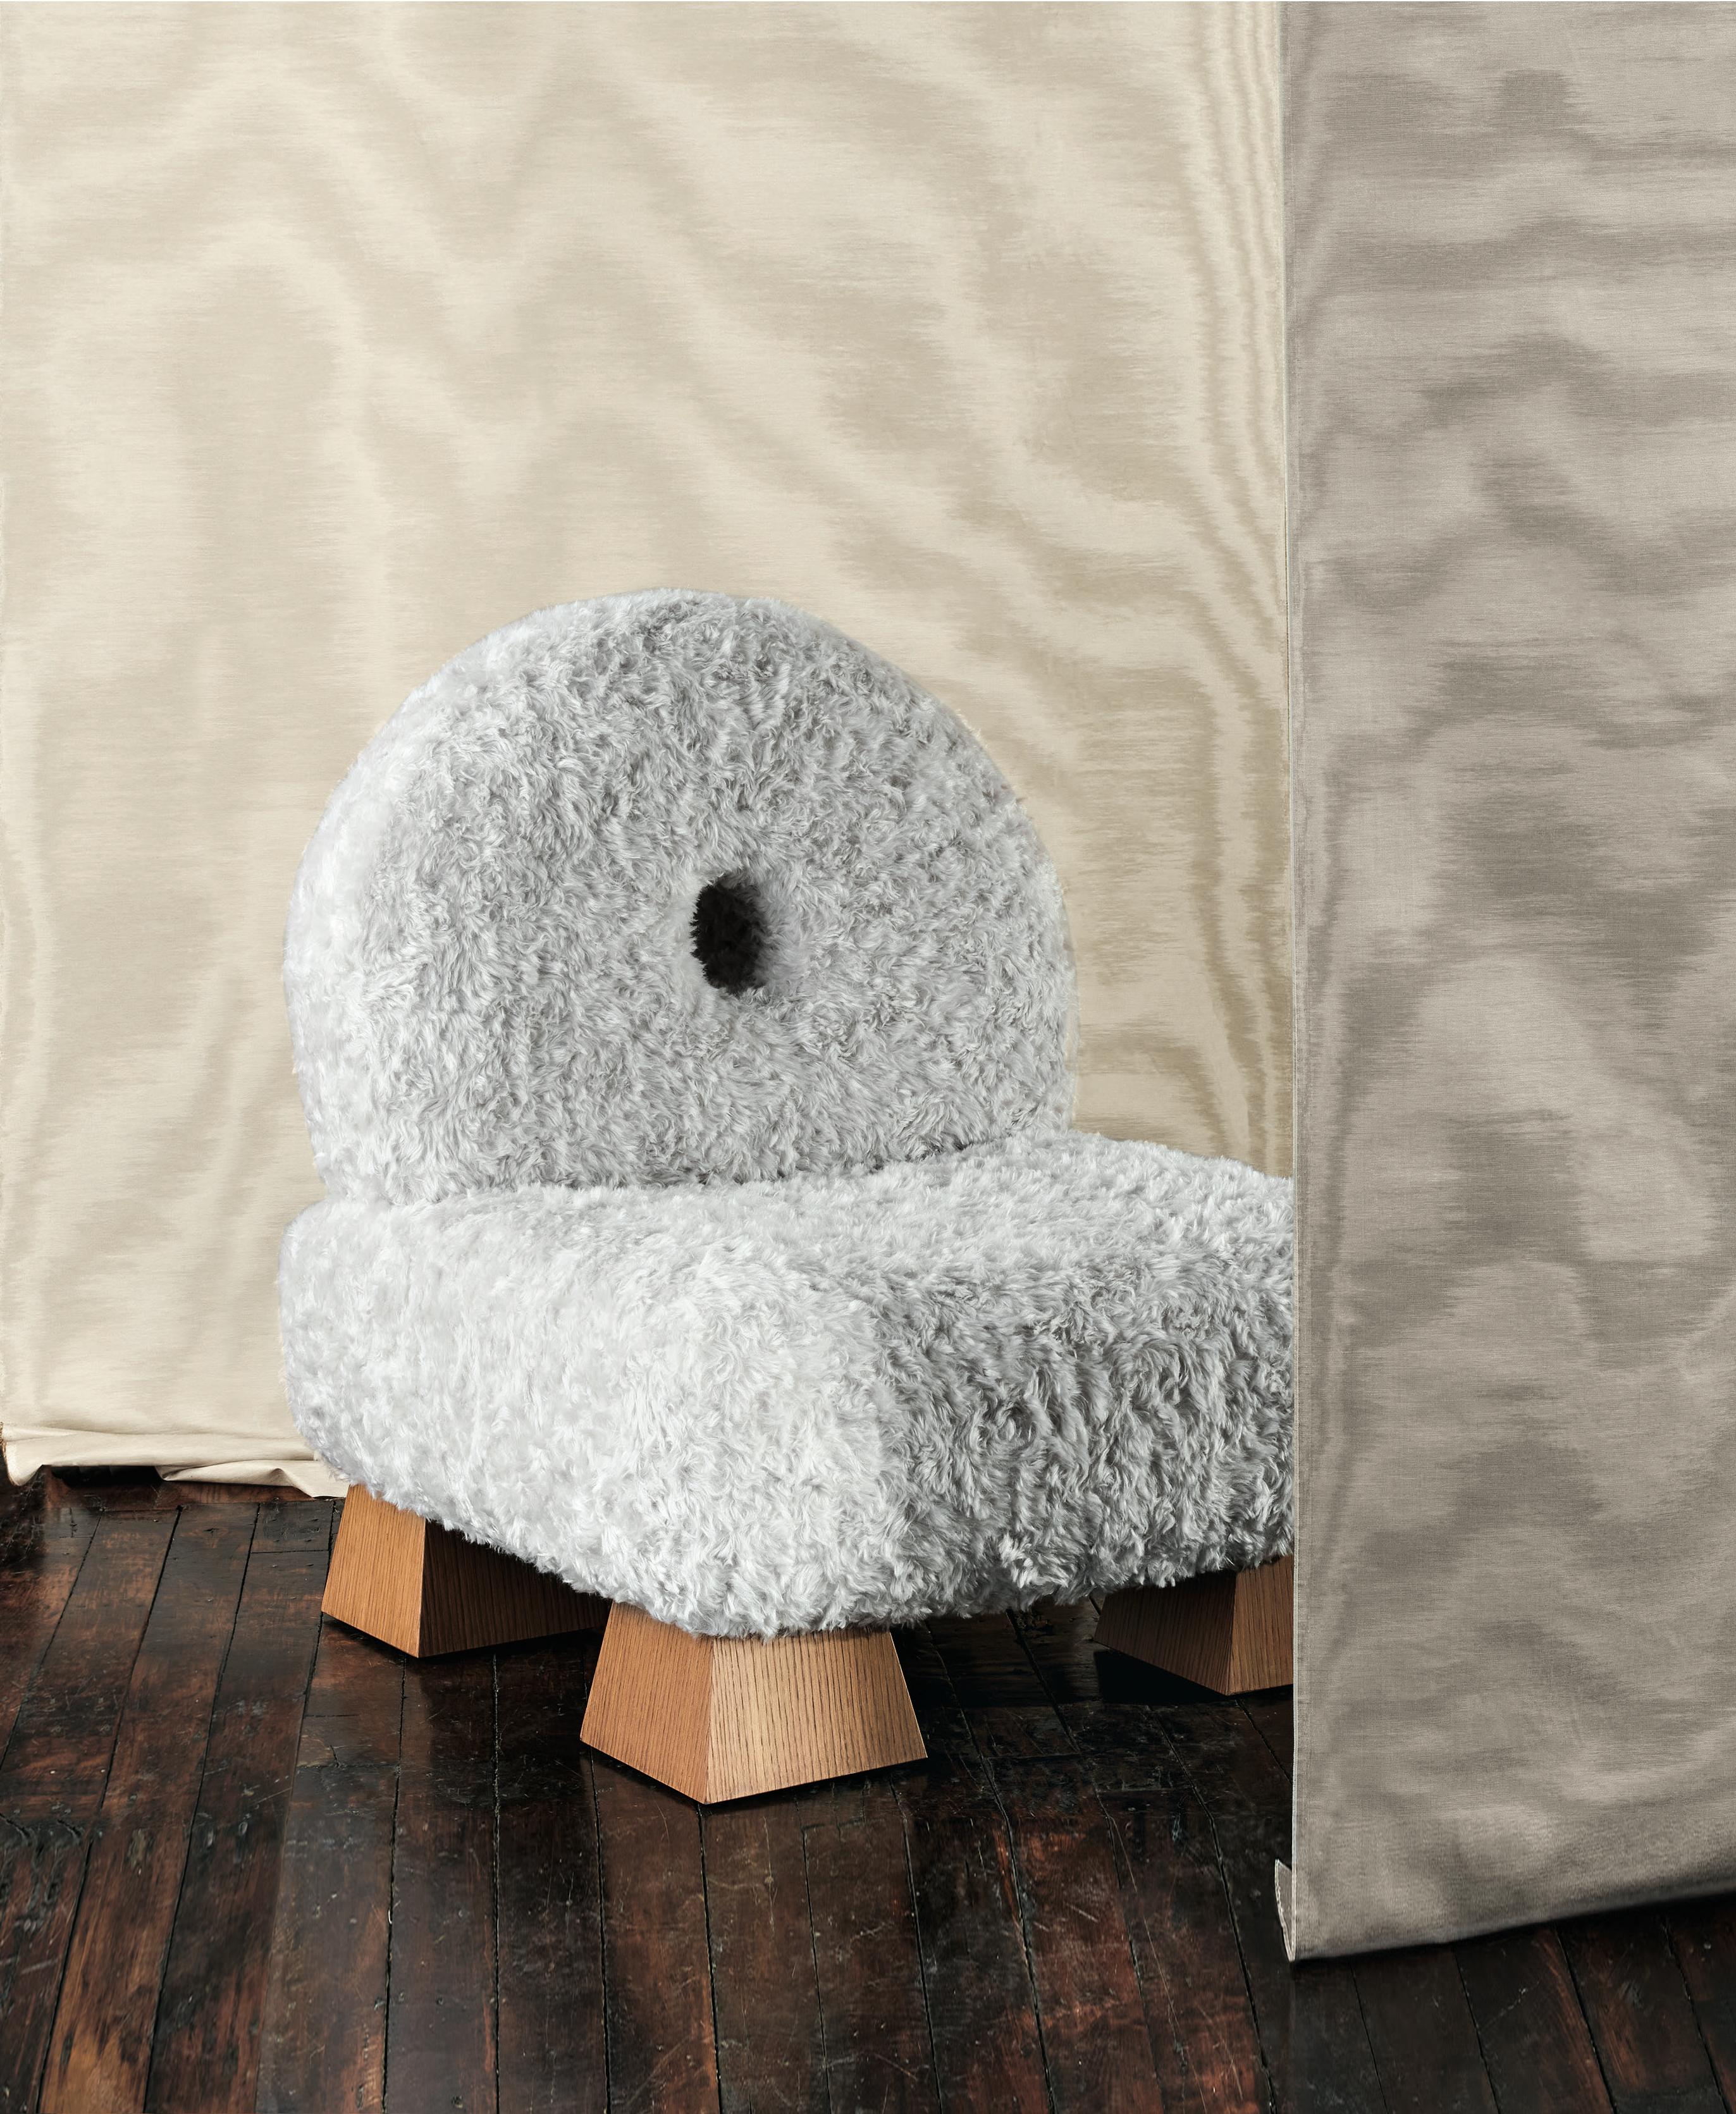 Oversize Asterisk chair
Upholstered in Raf Simmons Mohair
Legs are oak veneered 

Made in Queens, NY.